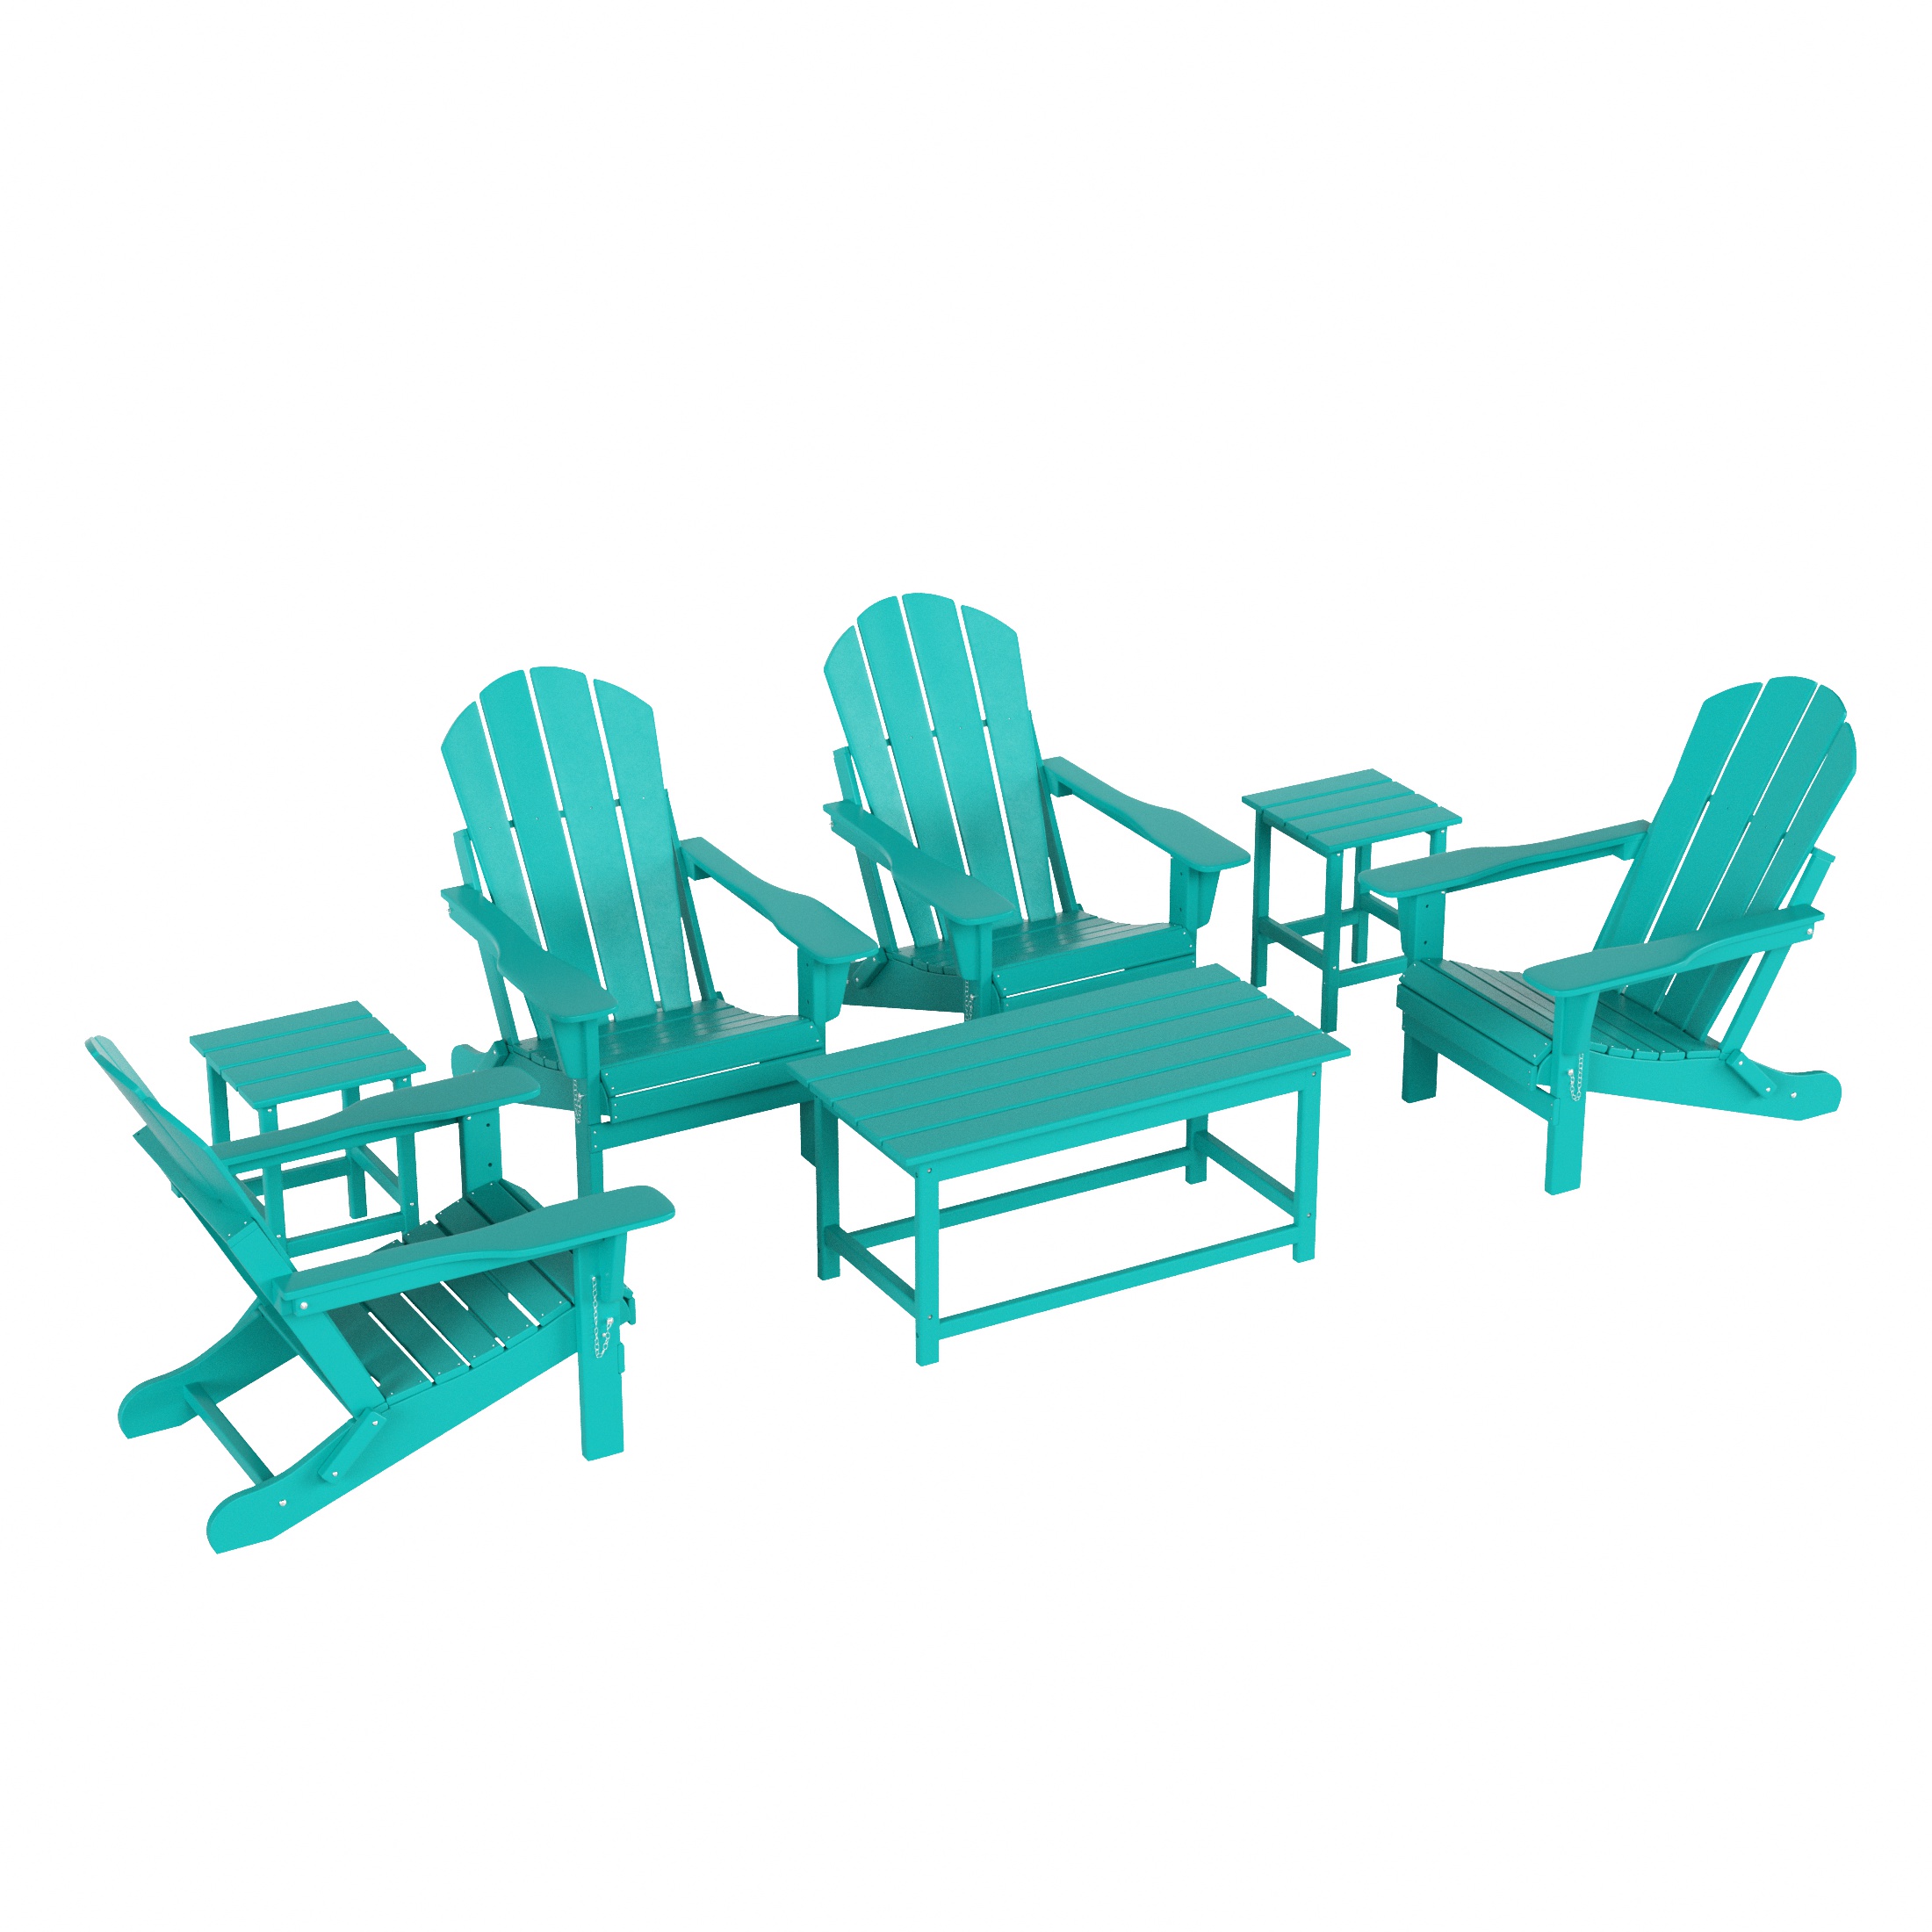 WestinTrends Malibu 7-Pieces Outdoor Patio Furniture Set, All Weather Outdoor Seating Plastic Adirondack Chair Set of 4, Coffee Table and 2 Side Table, Turquoise - image 1 of 7